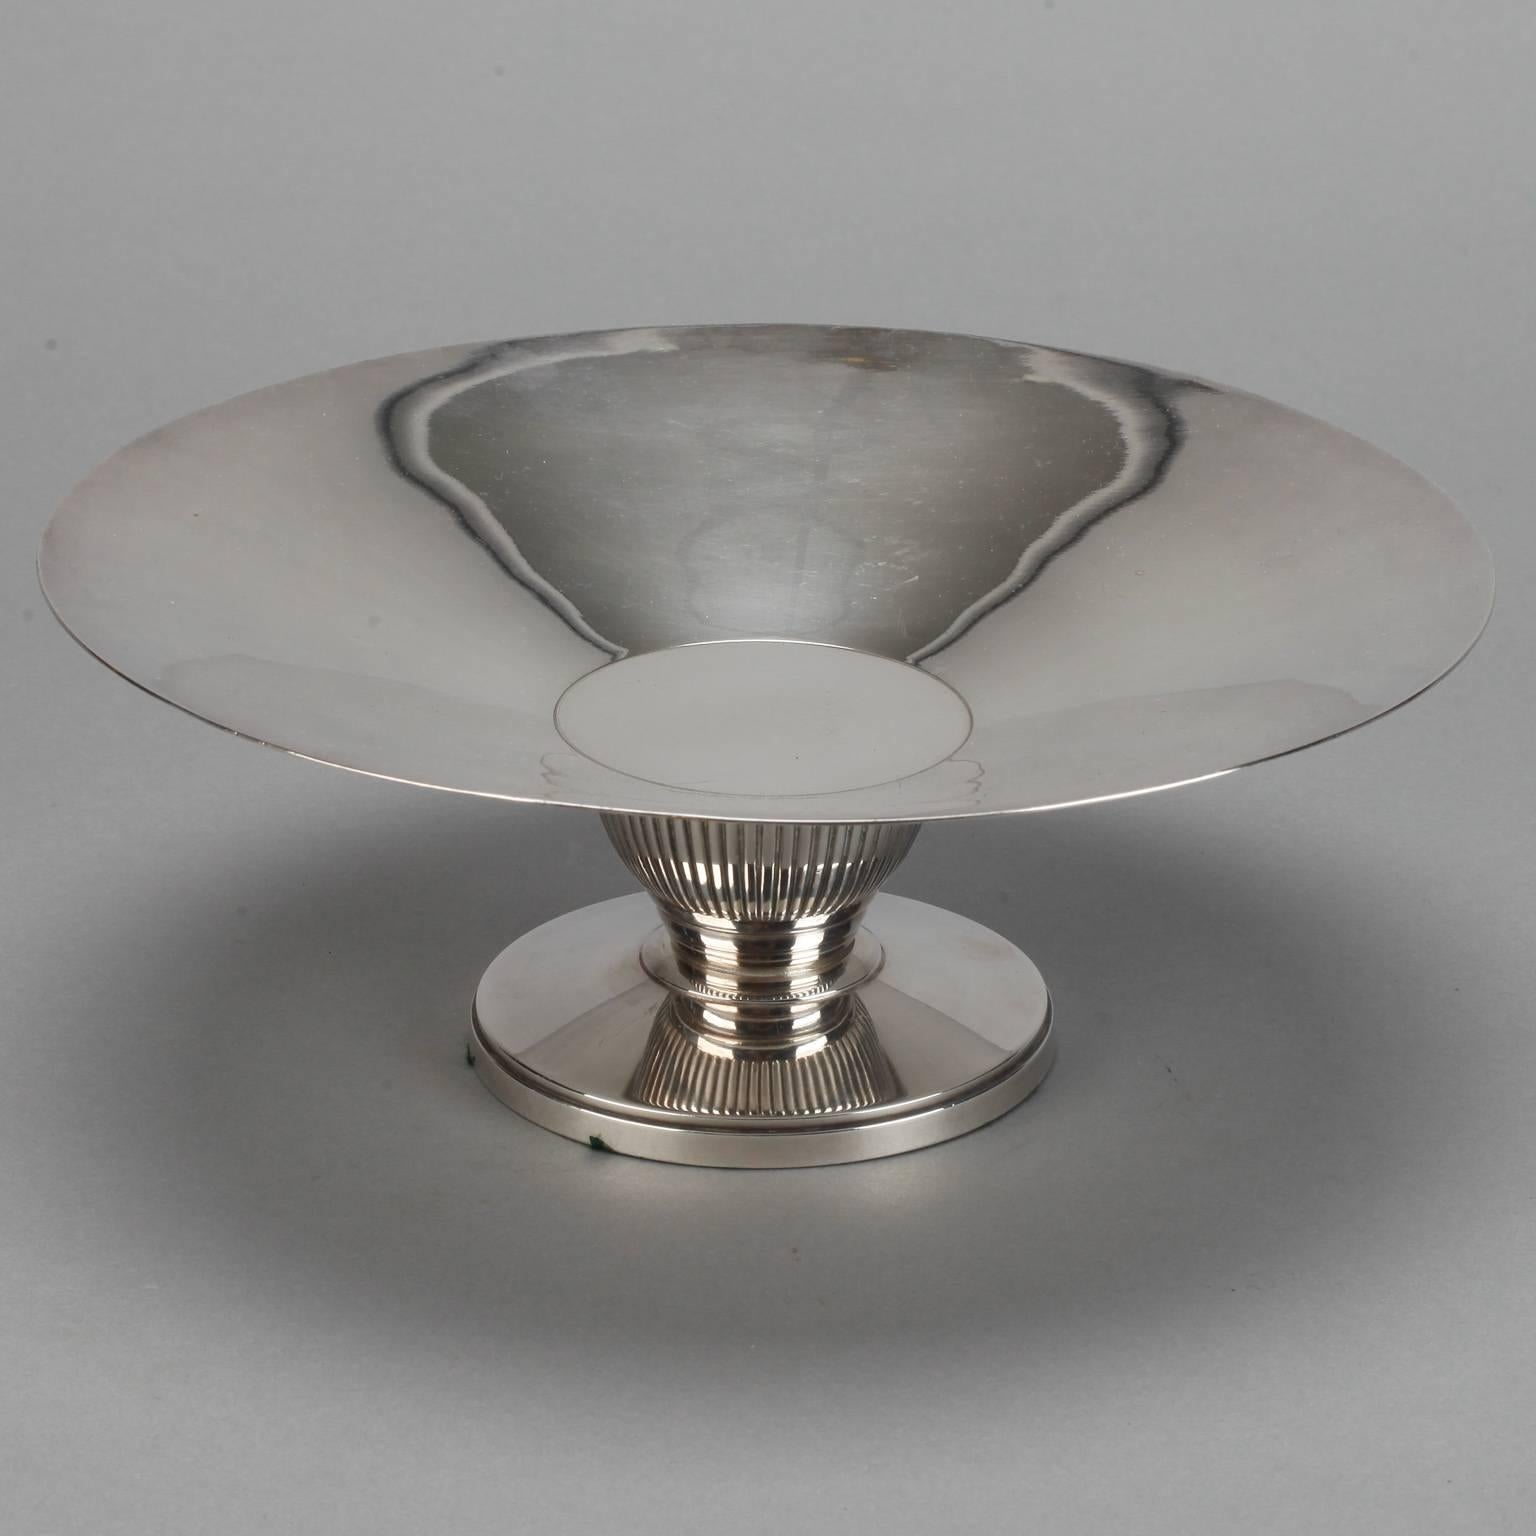 European Midcentury Silver Plated Tazza